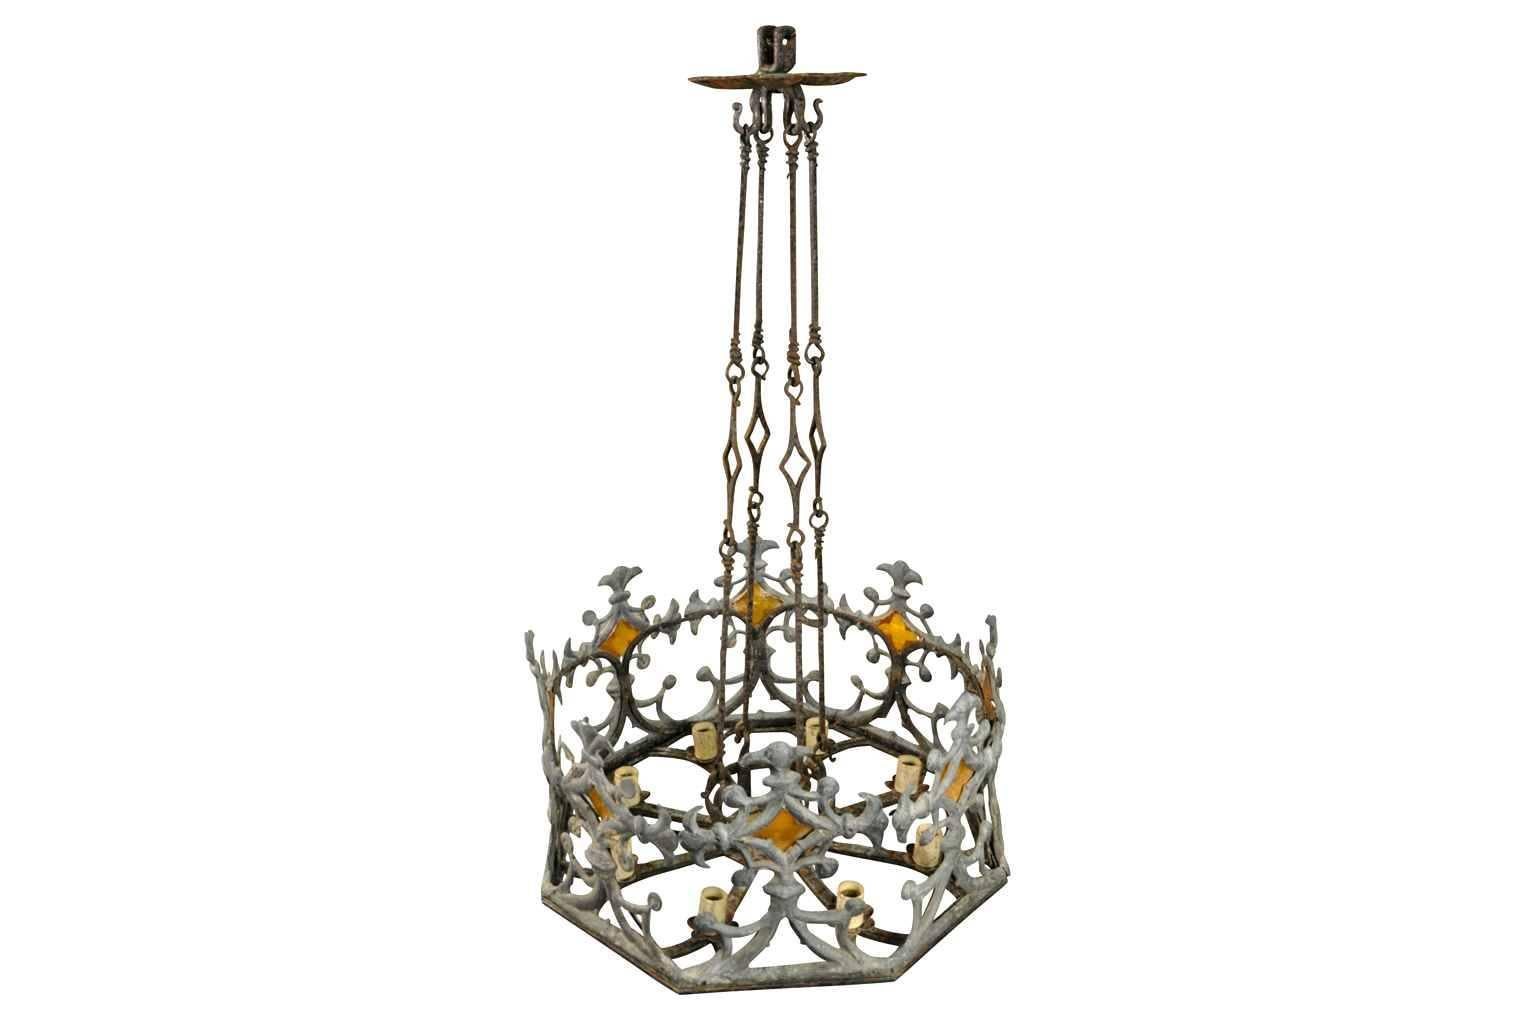 A fantastic mid-19th century French chandelier constructed from iron, lead and amber glass. A stunning statement.